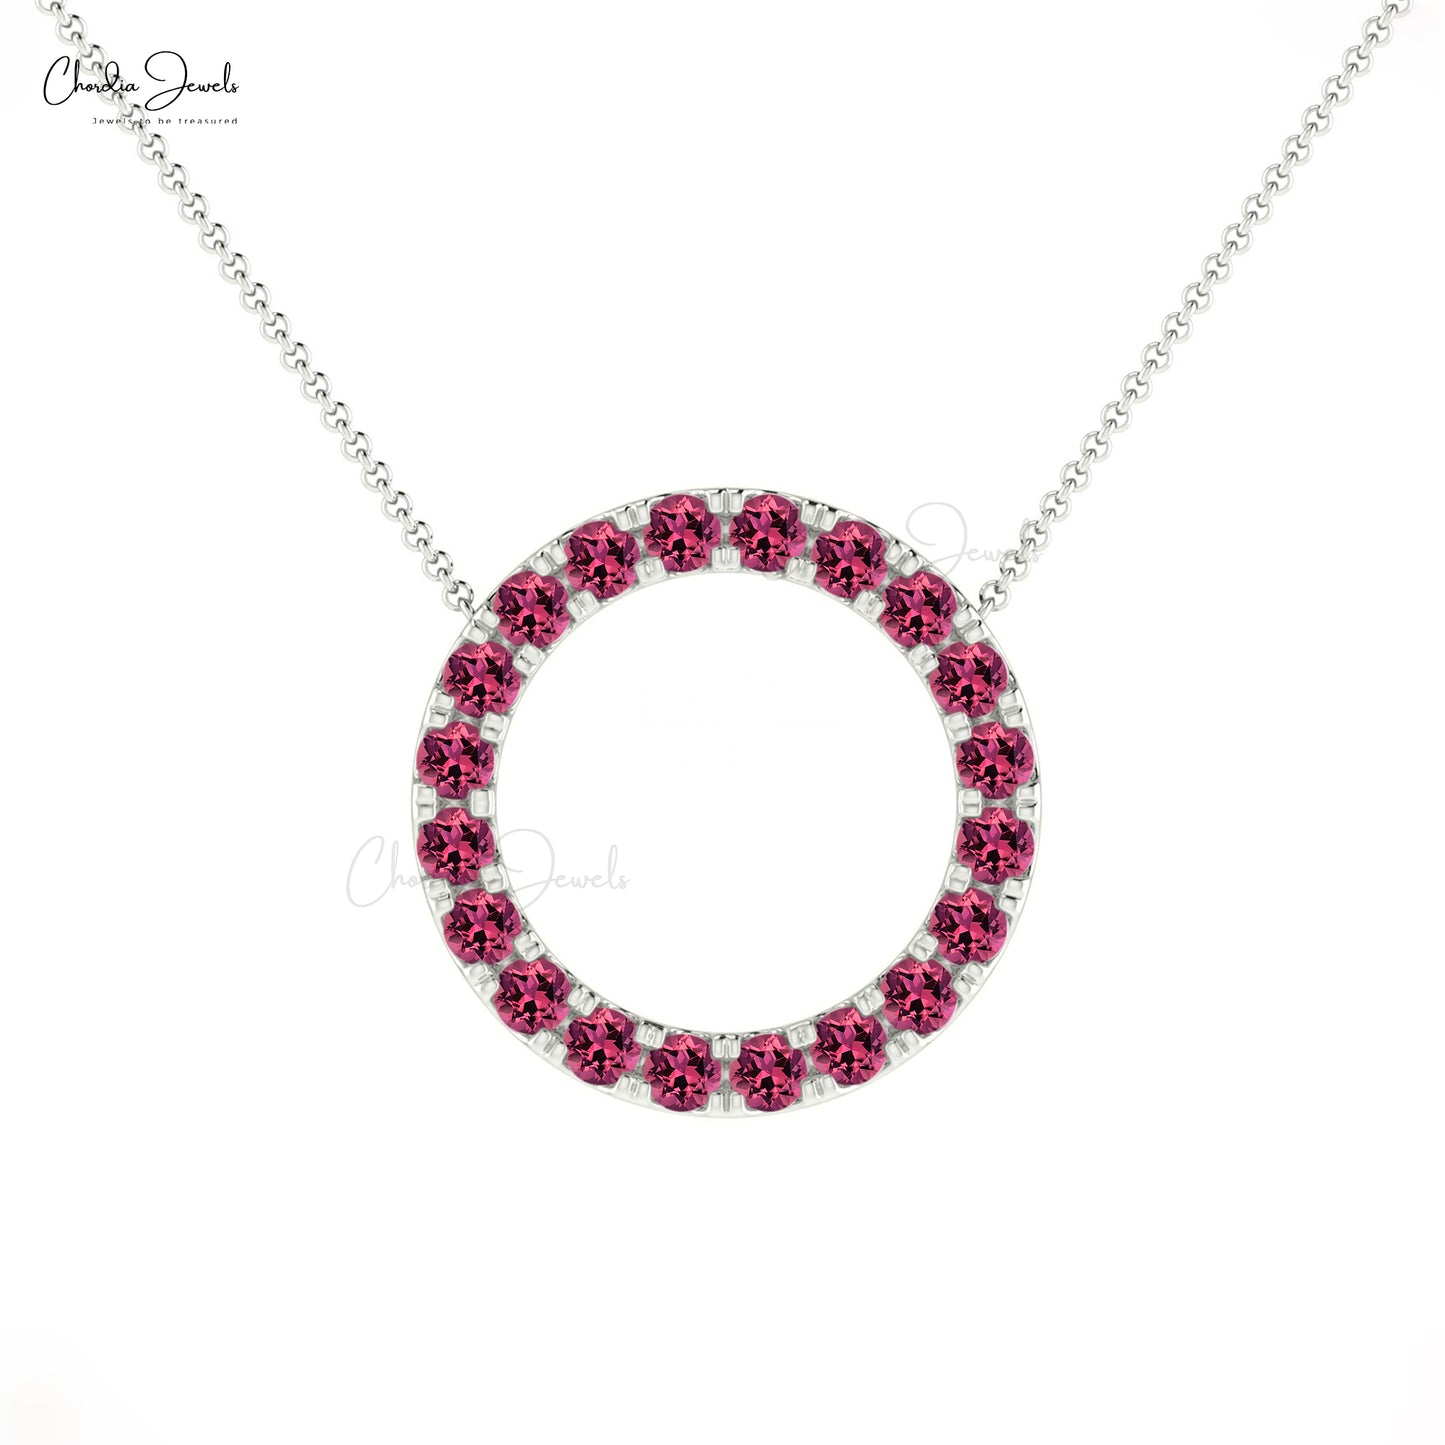 Real Tourmaline Necklace